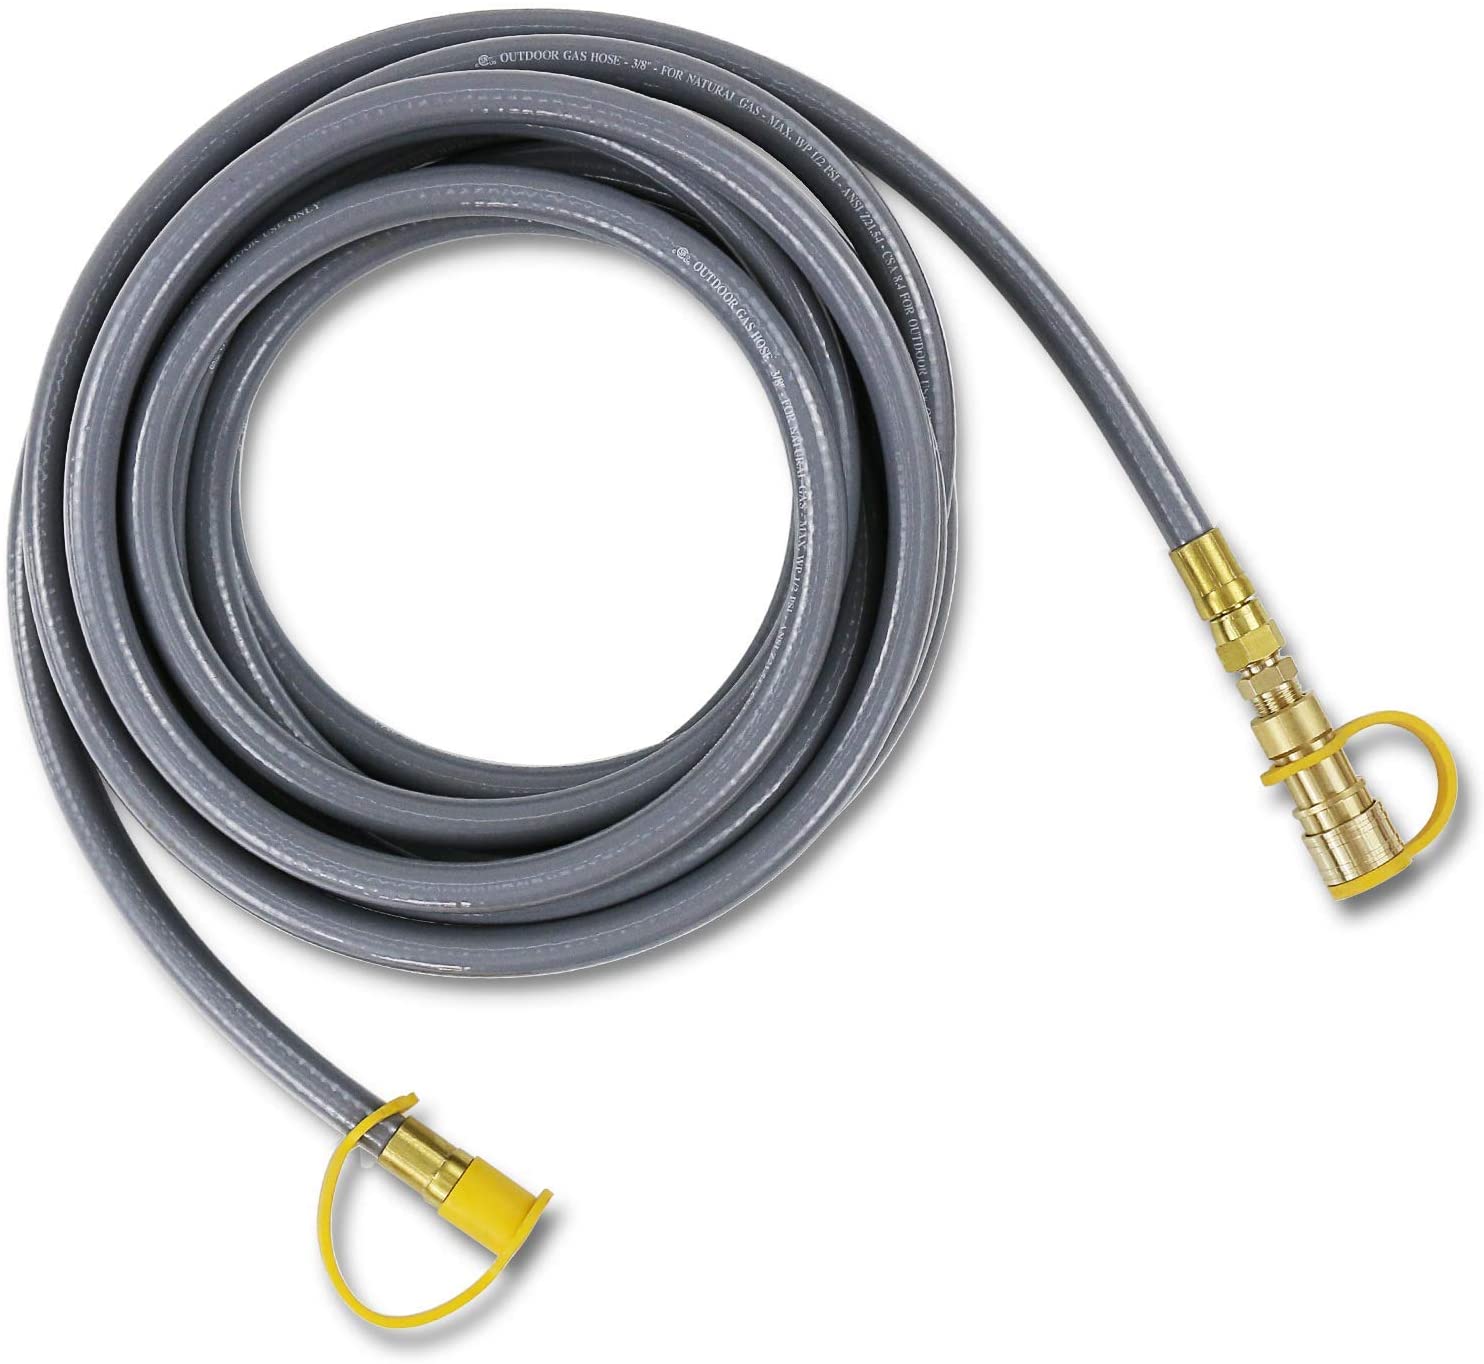 Nature Gas Conversion Kit, 24 Feet Natural Gas 3/8 Female Flare, 1/2 male Flare Hose with Quick Connect |99.GVR4